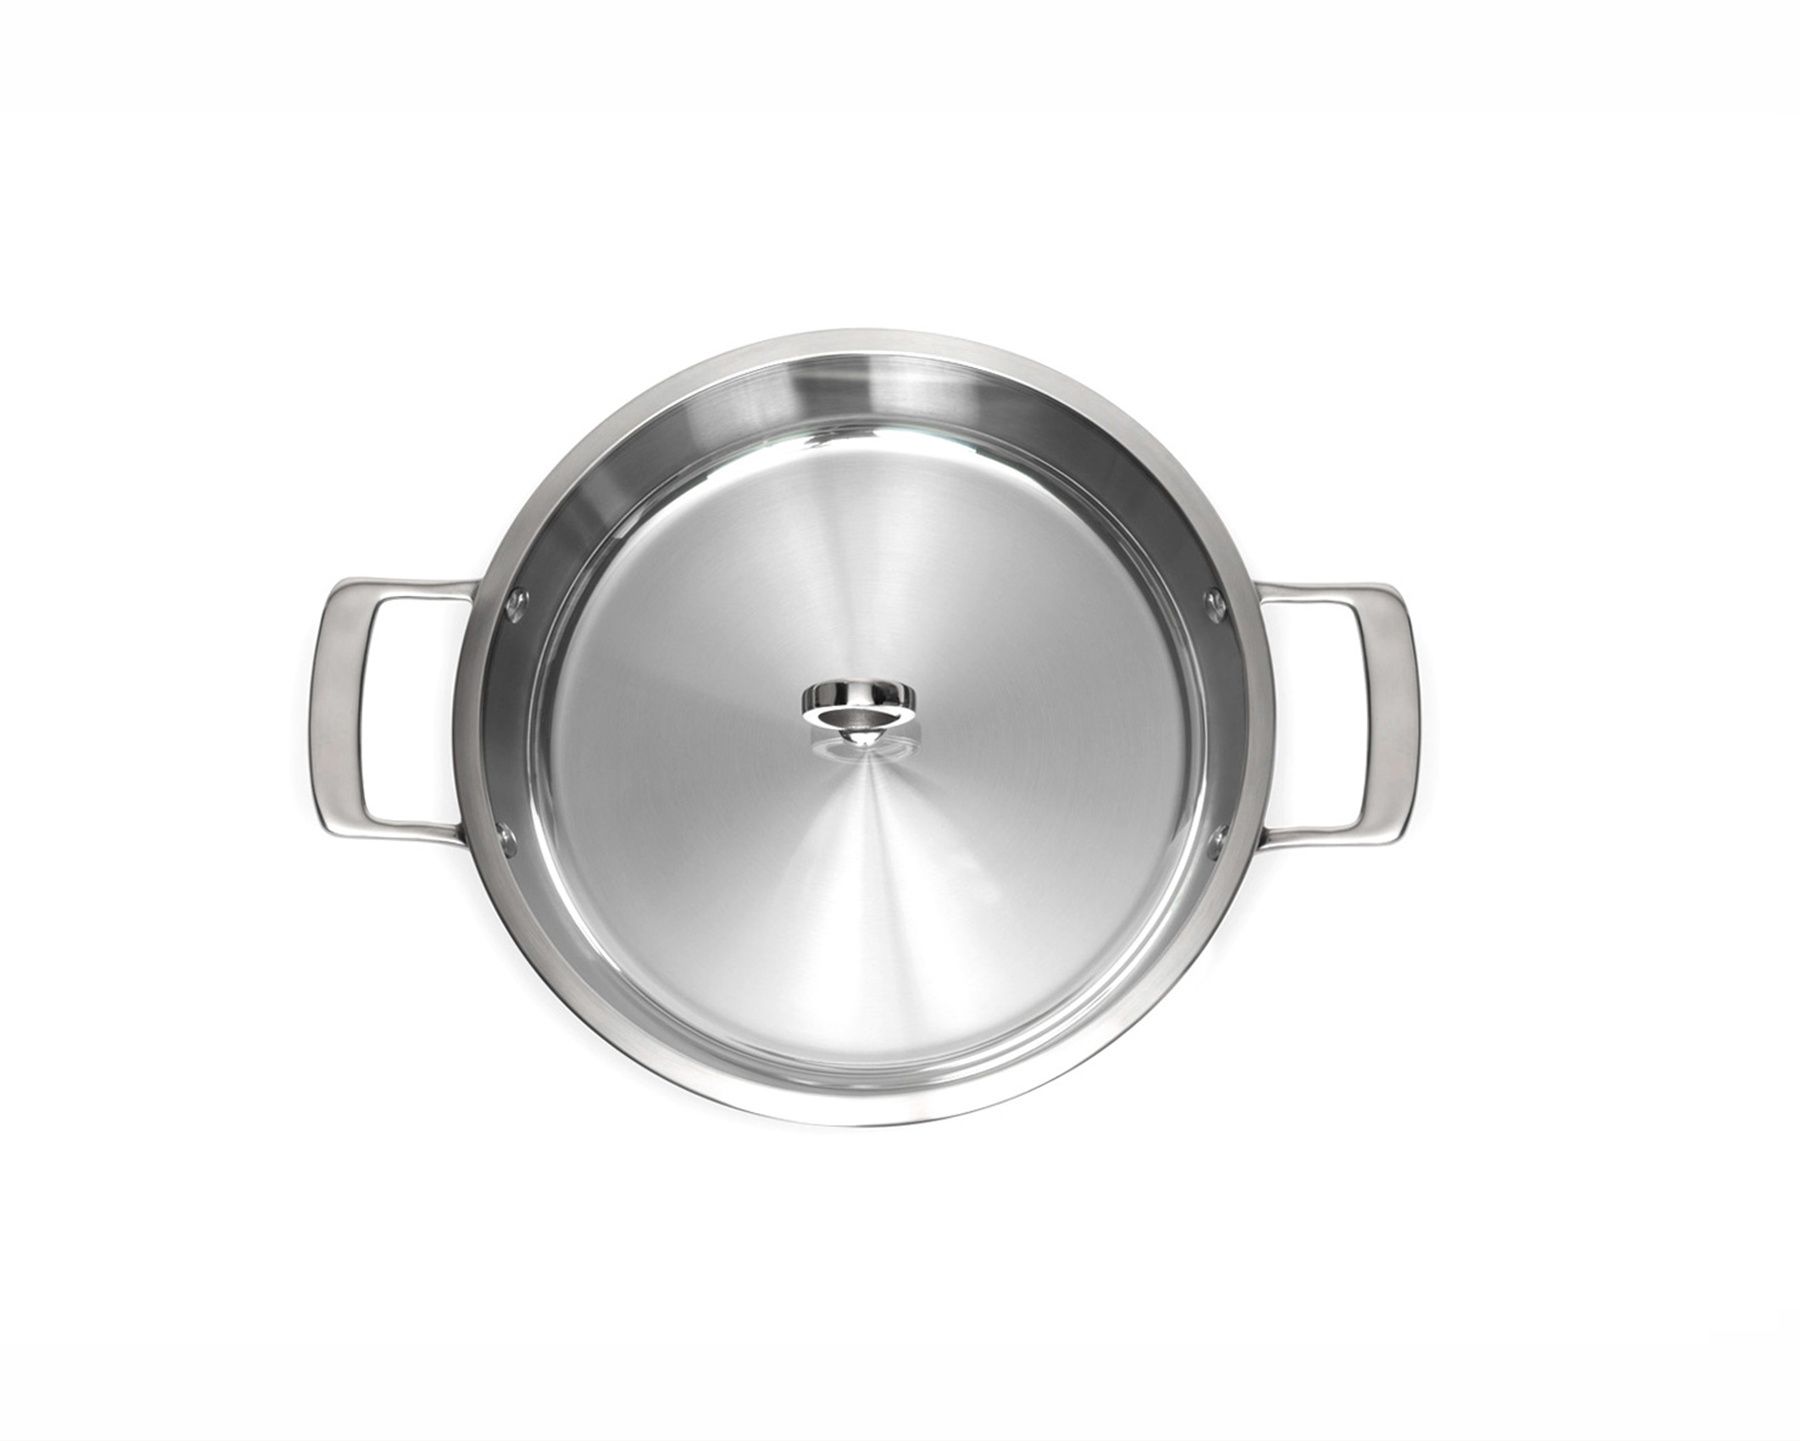 Uncoated 30cm Olav Serving Pan Top View